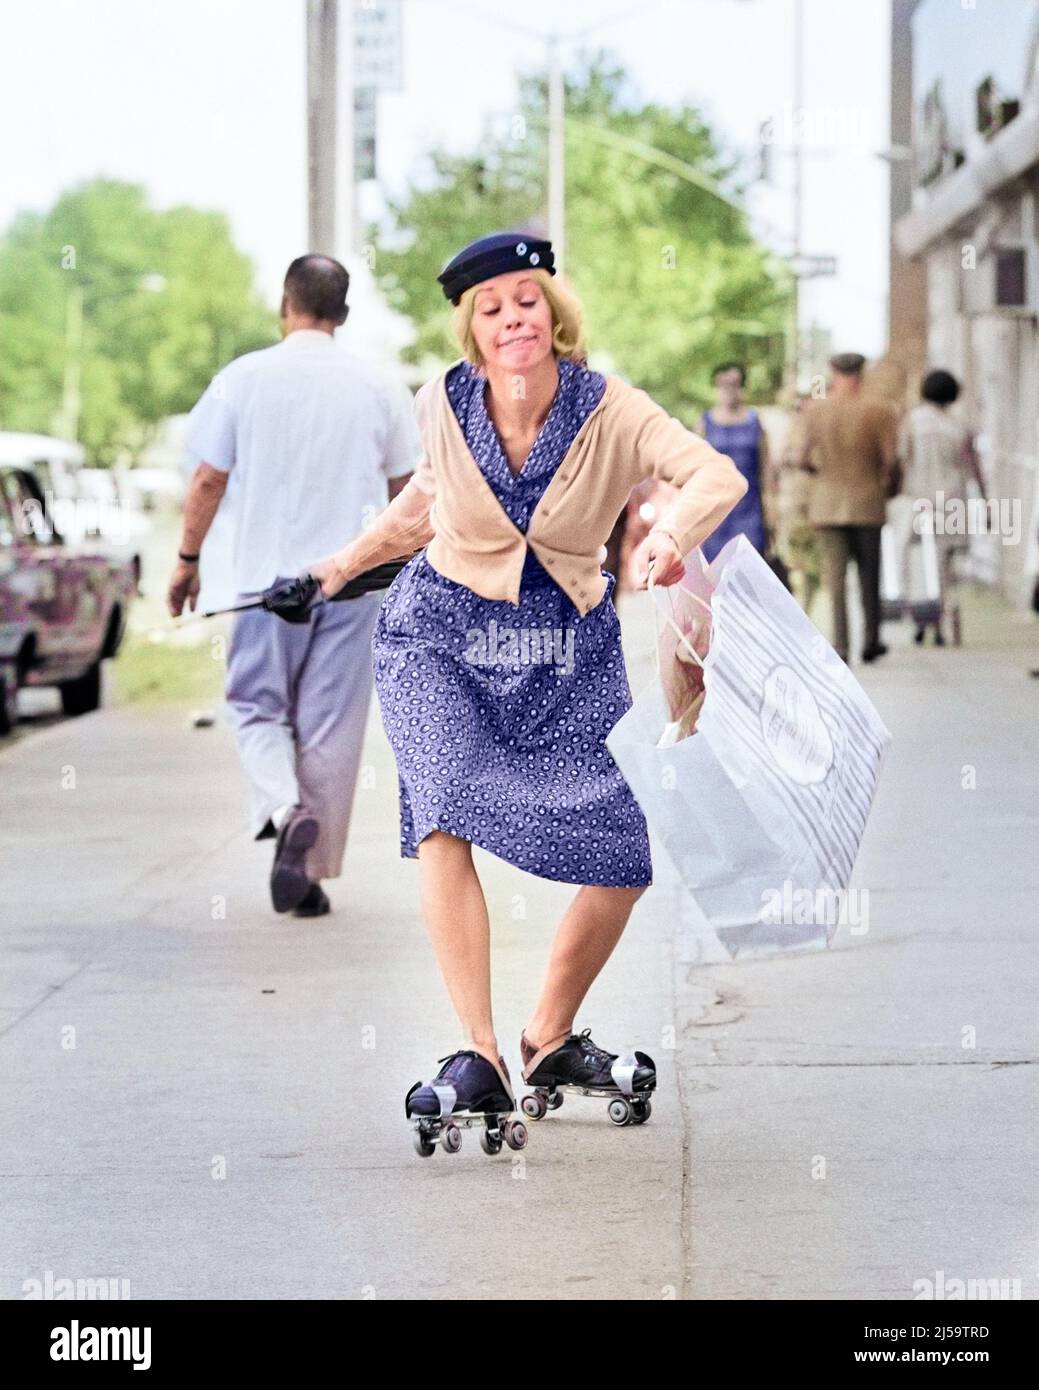 1960s 1970s WOMAN CHARACTER SHOPPING BAG LADY WITH A FUNNY FACIAL EXPRESSION WEARING ROLLER SKATES SKATING ON CITY SIDEWALK - c11338c HAR001 HARS COPY SPACE FULL-LENGTH LADIES PERSONS CHARACTER TRANSPORTATION FREEDOM HUMOROUS HAPPINESS WEIRD CHEERFUL PROGRESS ZANY COMICAL UNCONVENTIONAL FOOLISH SIMPLE SMILES ABNORMAL COMEDY GOOFY INSANITY JOYFUL STYLISH IDIOSYNCRATIC AMUSING BAG LADY BEHAVIOR CRAZINESS ECCENTRIC MID-ADULT MID-ADULT WOMAN OR MADNESS UNIQUE CAUCASIAN ETHNICITY CRAZY ERRATIC HAR001 OBLIVIOUS OLD FASHIONED OUTRAGEOUS Stock Photo